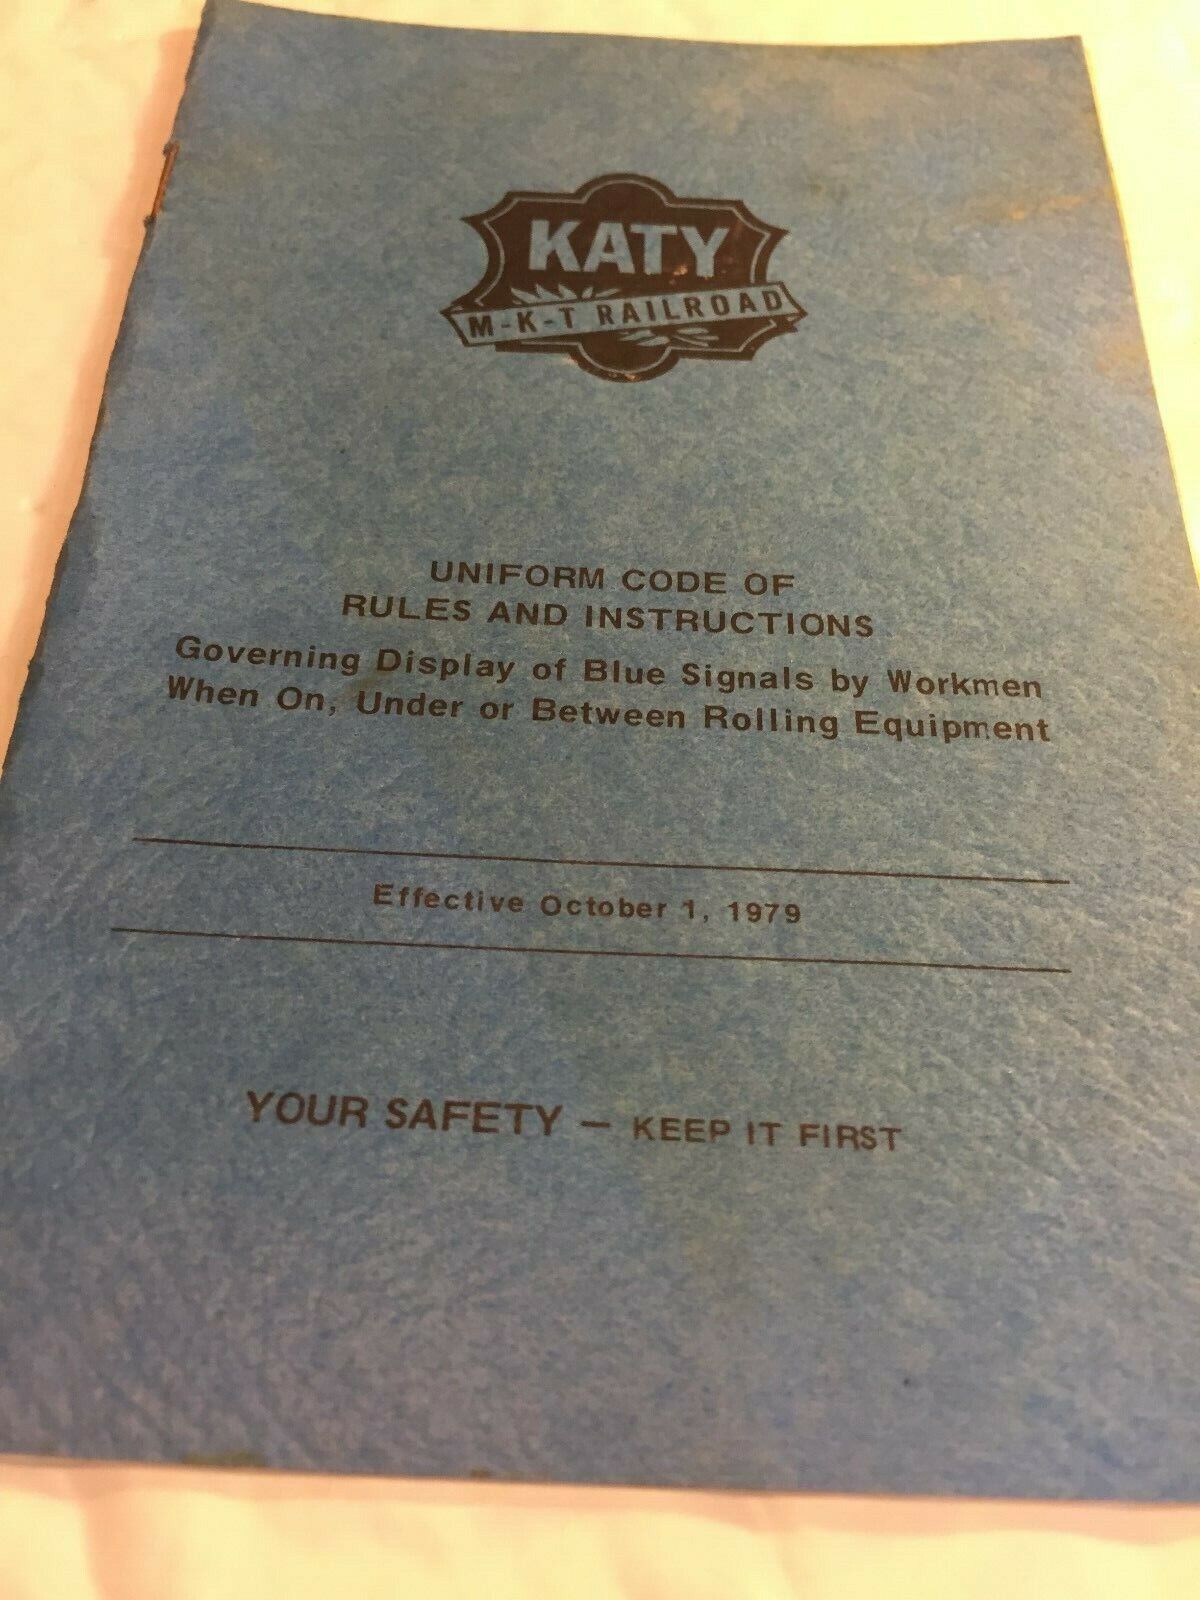 M-K-T / Katy Uniform code of Rules and Instructions 1979